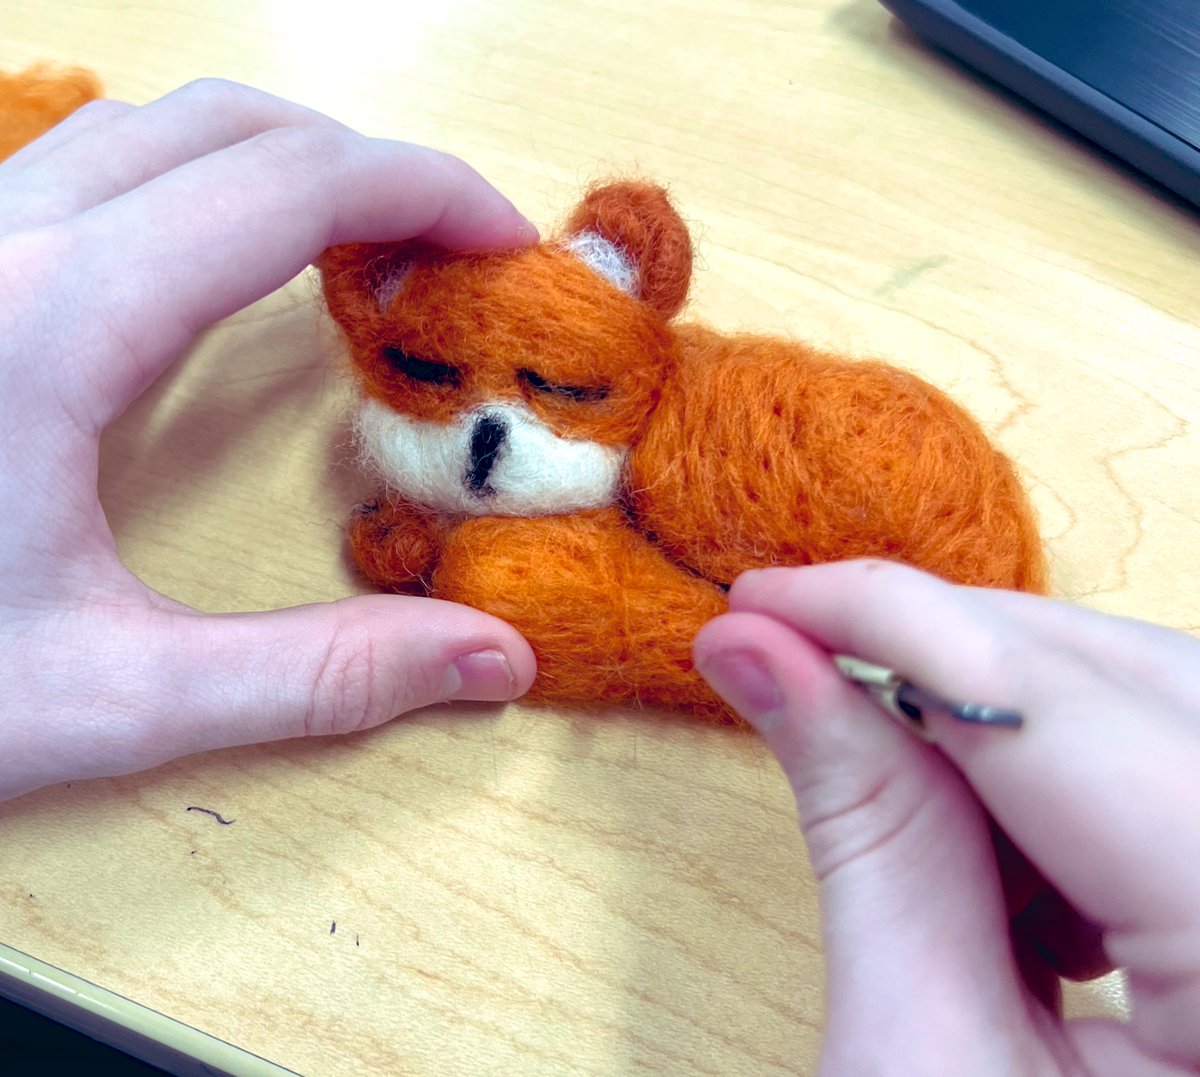 8th graders have been Needle Felting! This has become my favorite unit to teach! These are made completely out of felted wool. @BAM_MS_Official @krhackett #needlefelting #feltedwool #fiberarts #art #arted #artteacher #middleschoolart #k12artchat #creatures #feltedanimals